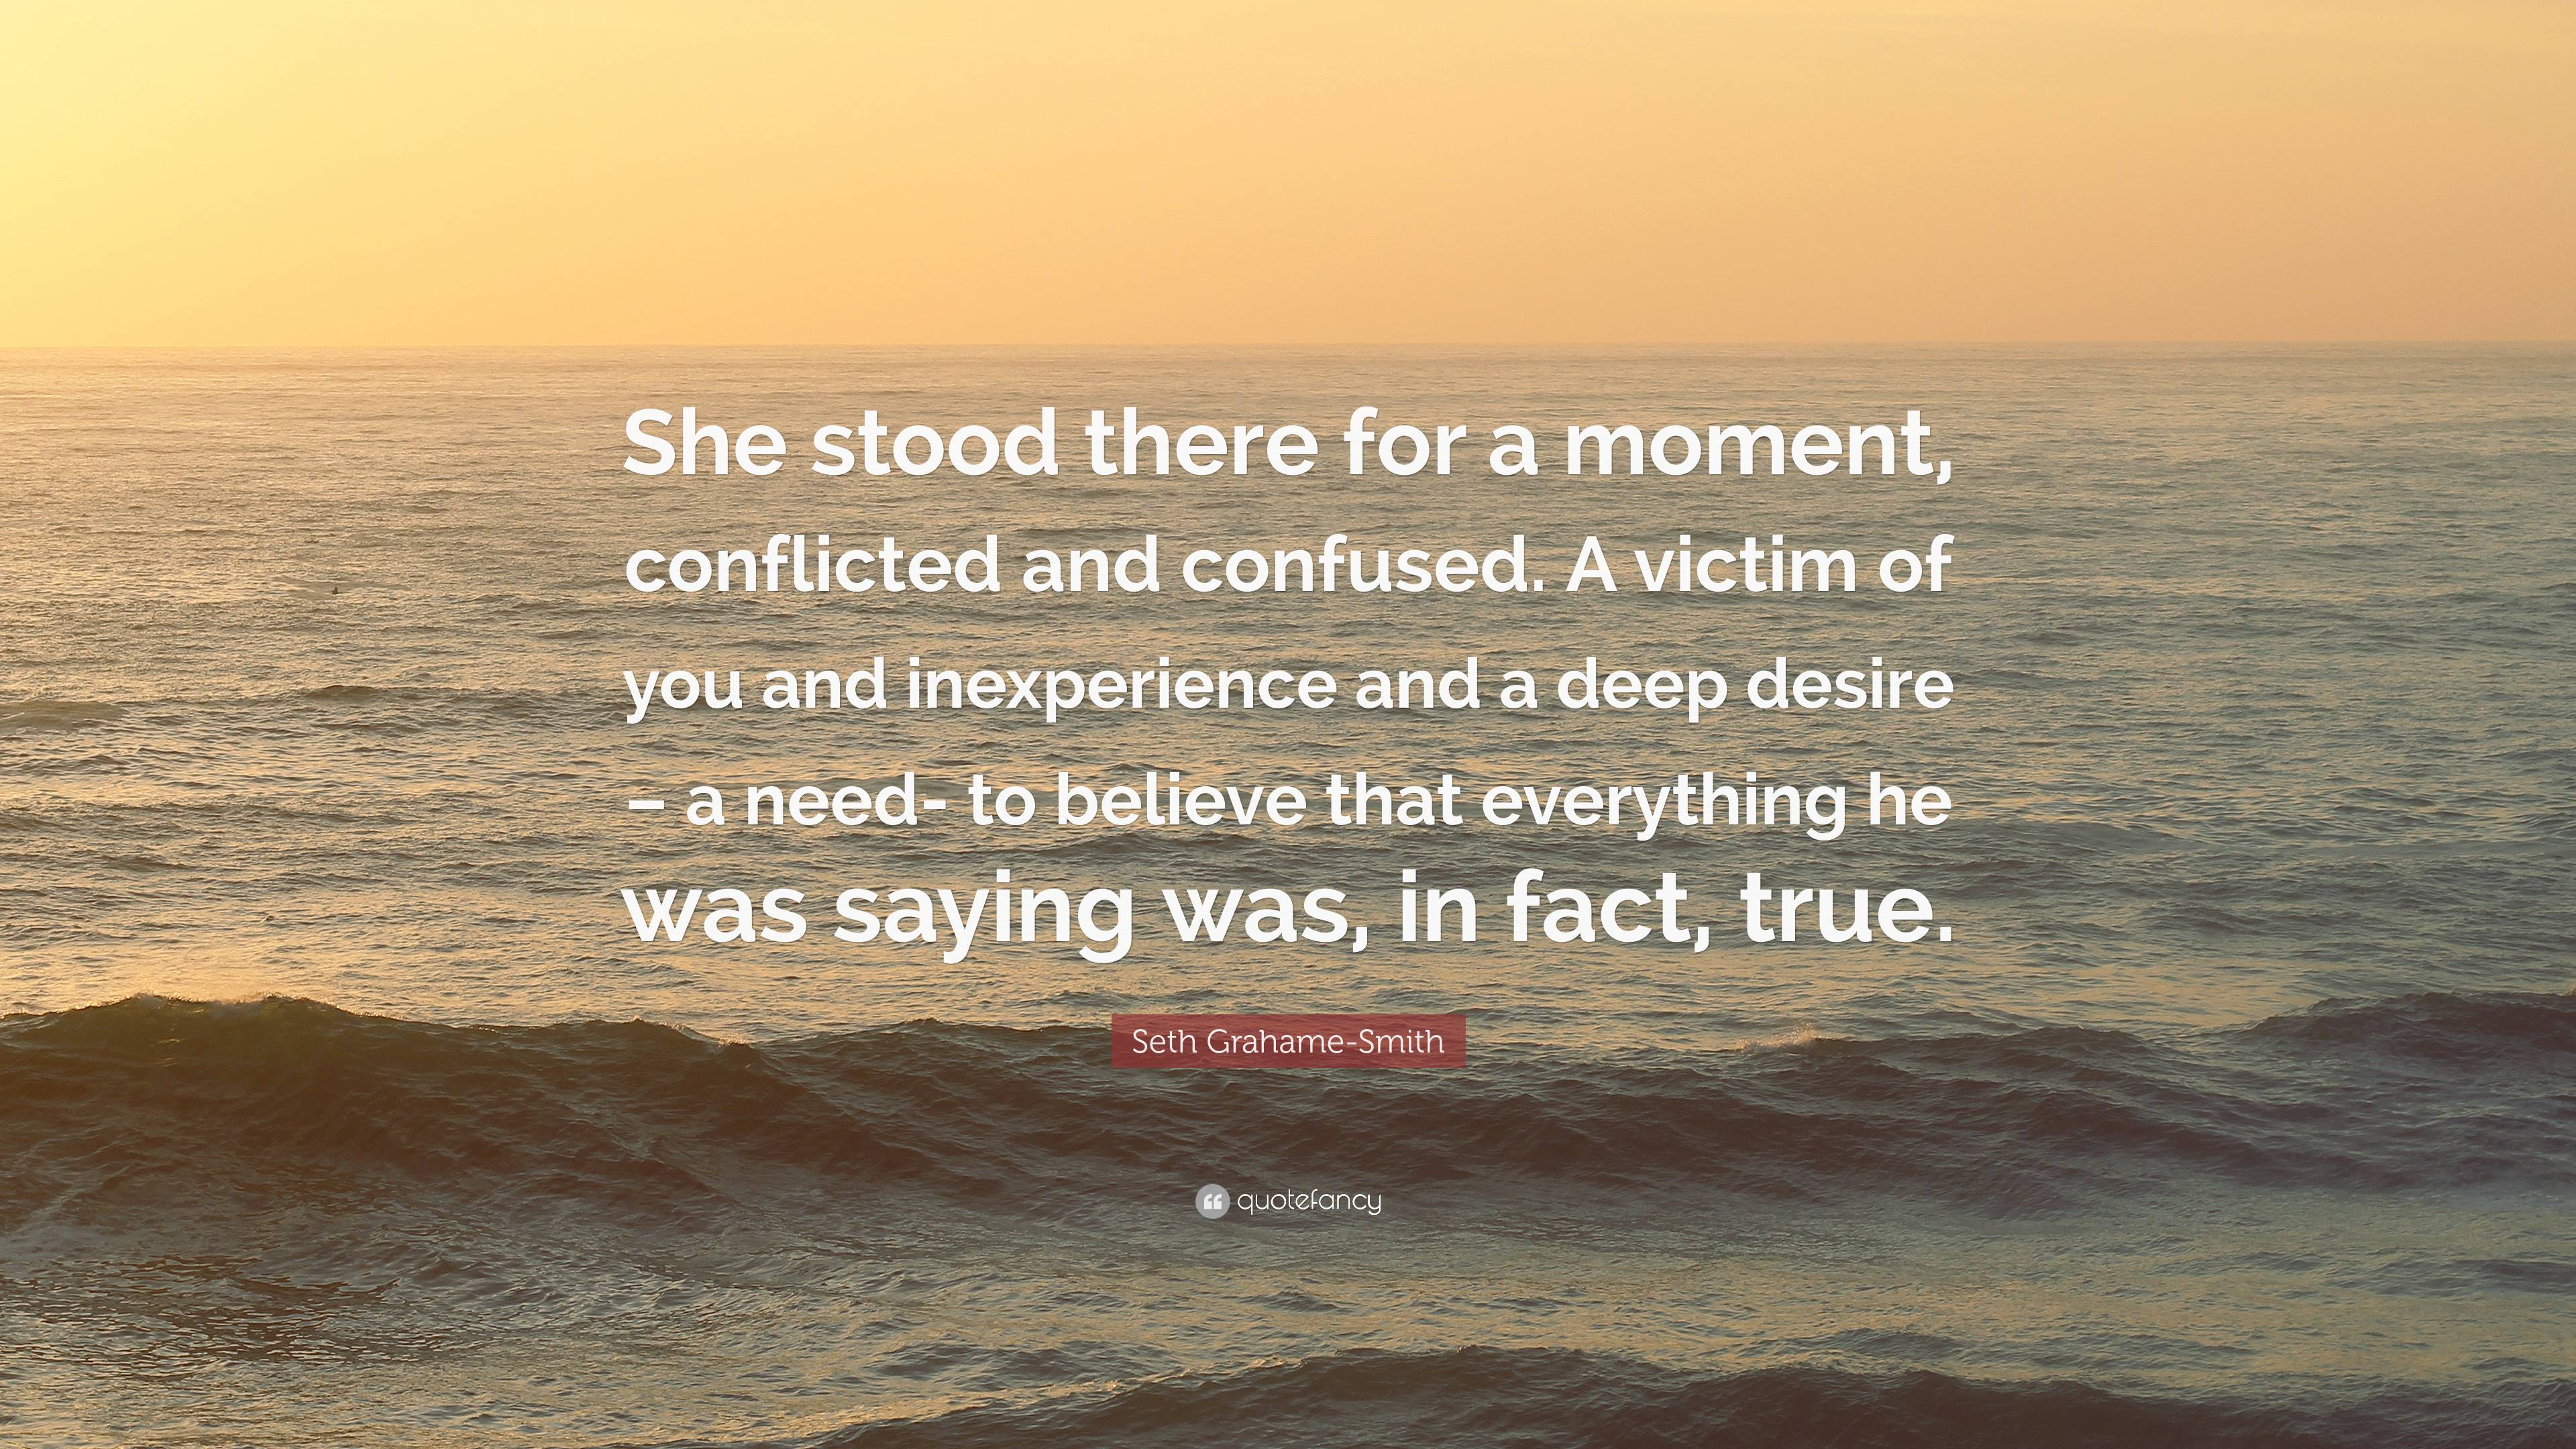 Seth Grahame-Smith Quote: “She stood there for a moment, conflicted and ...